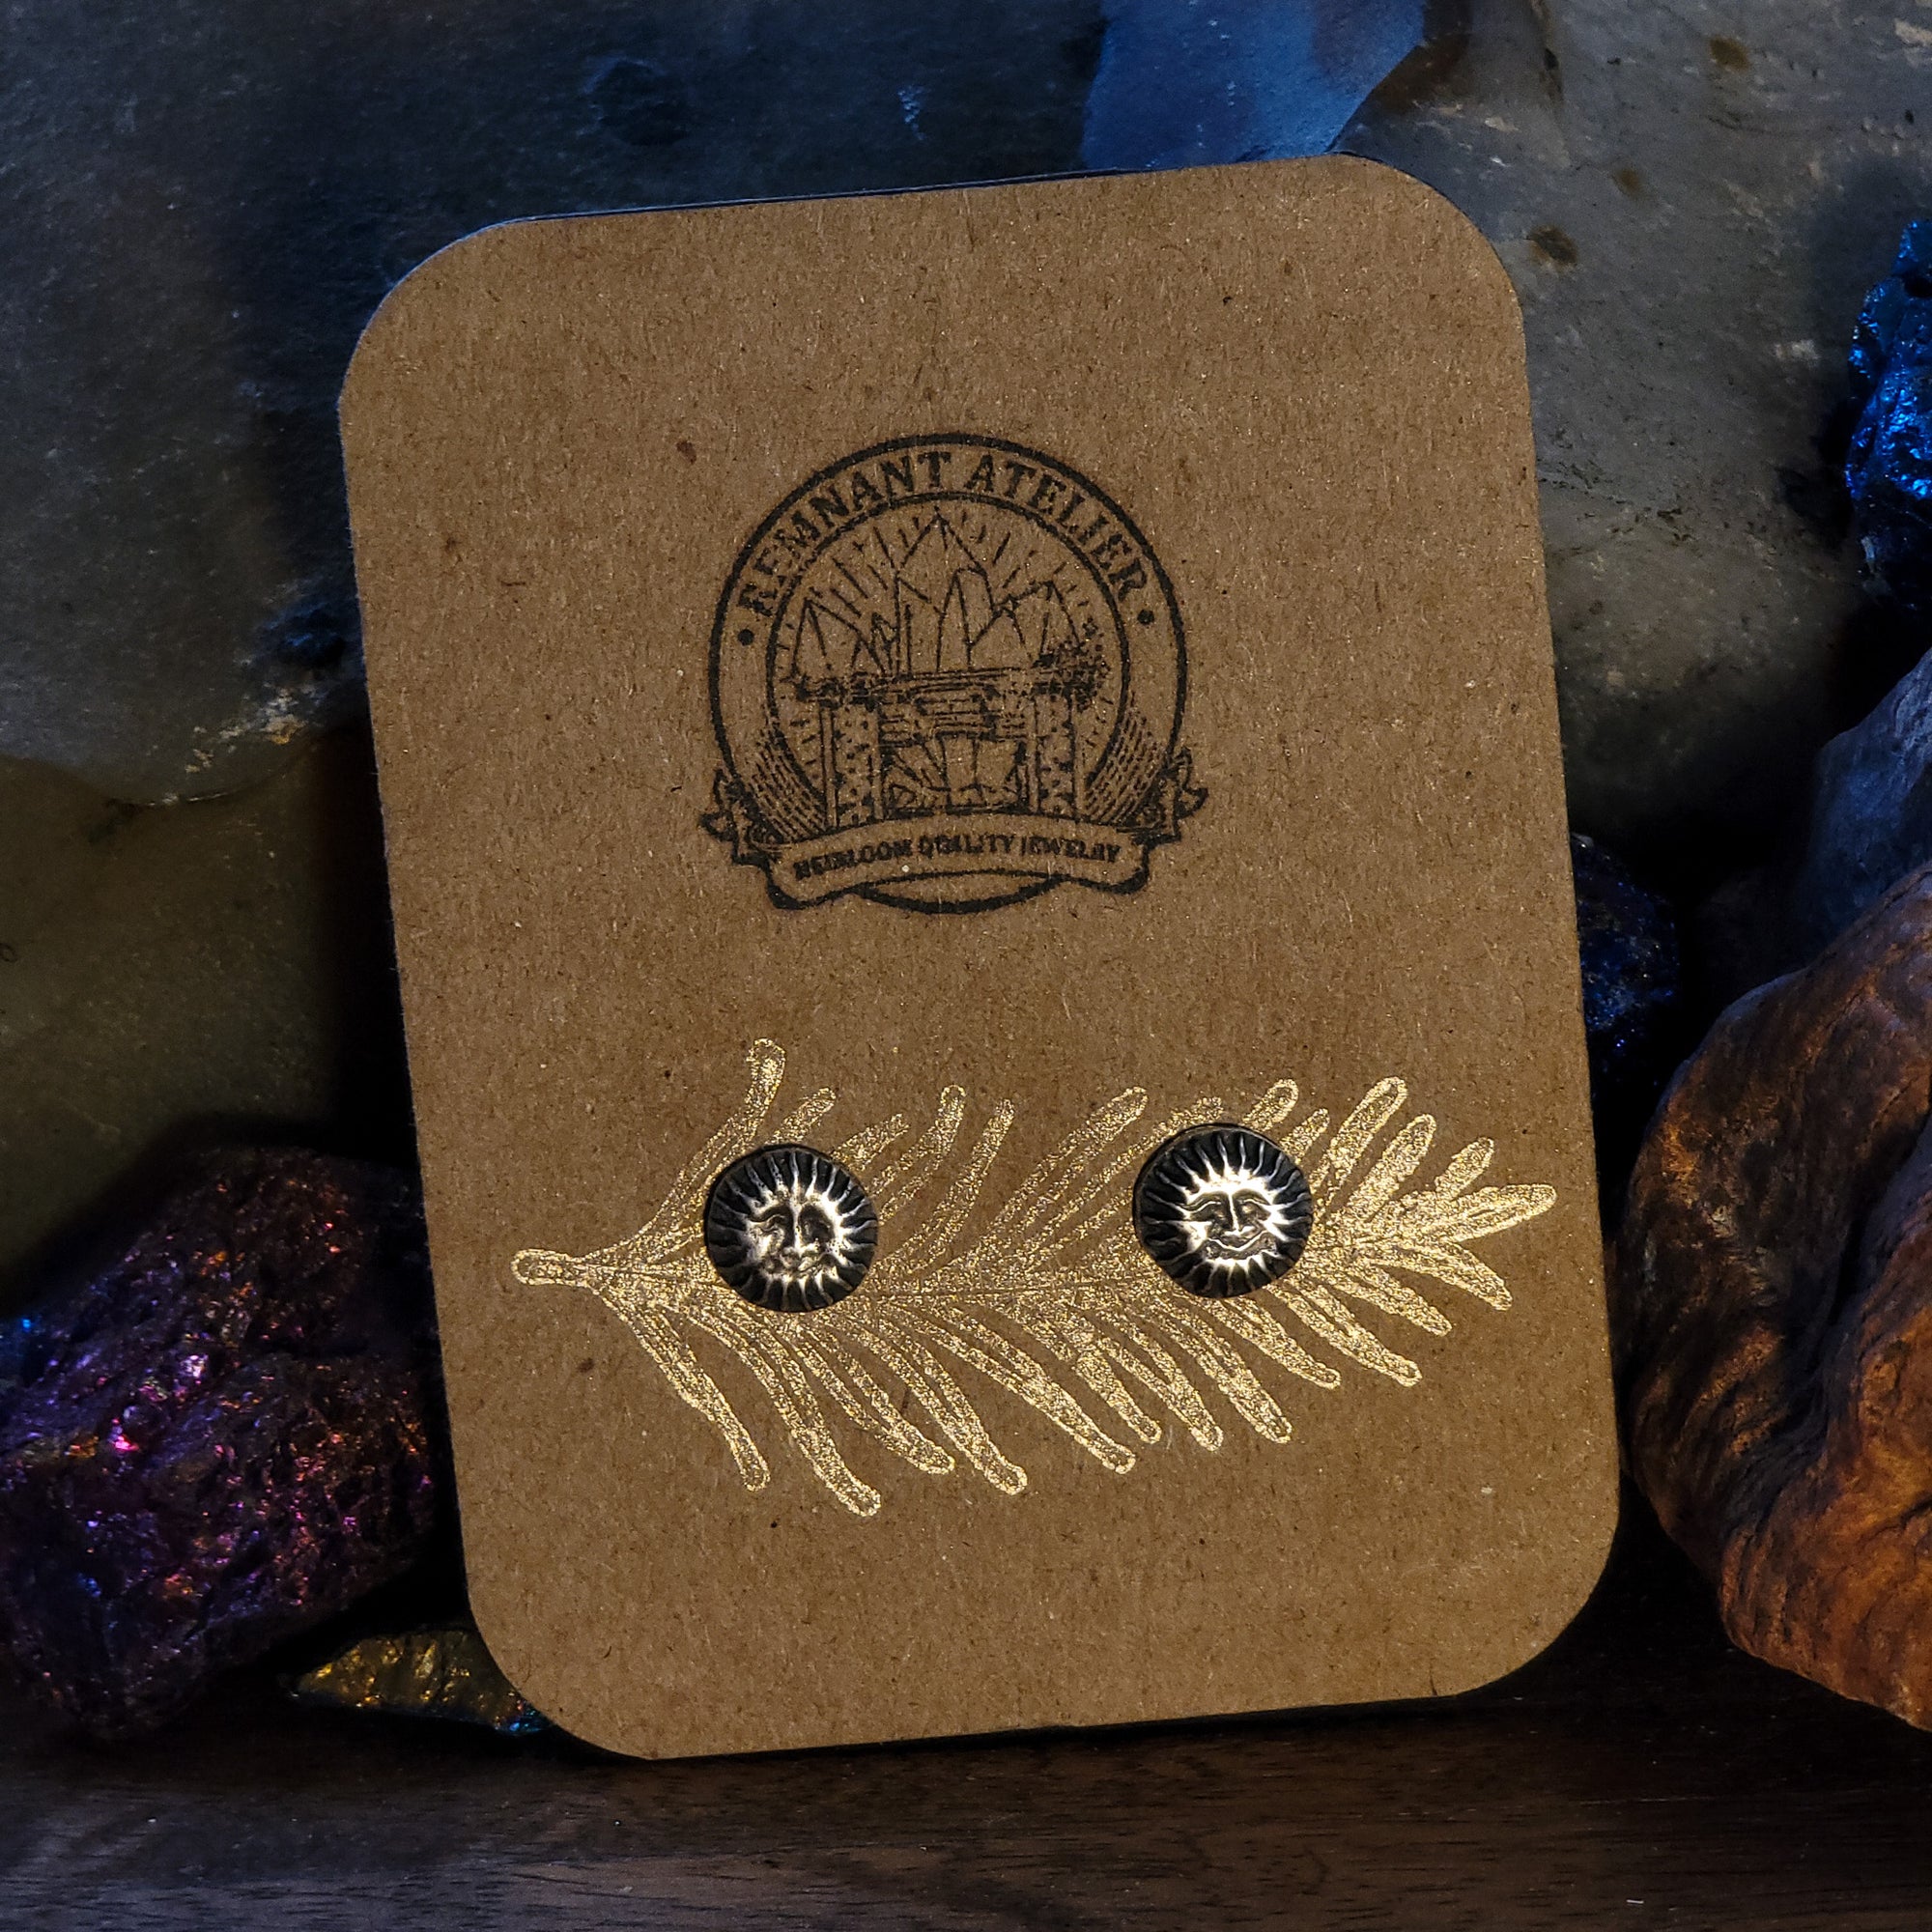 A pair of handmade sterling silver stud earrings in the shape of smiling suns are displayed on a cardboard earring card, surrounded by glittering crystals. The intricate details of the sun create a bright and cheerful look.